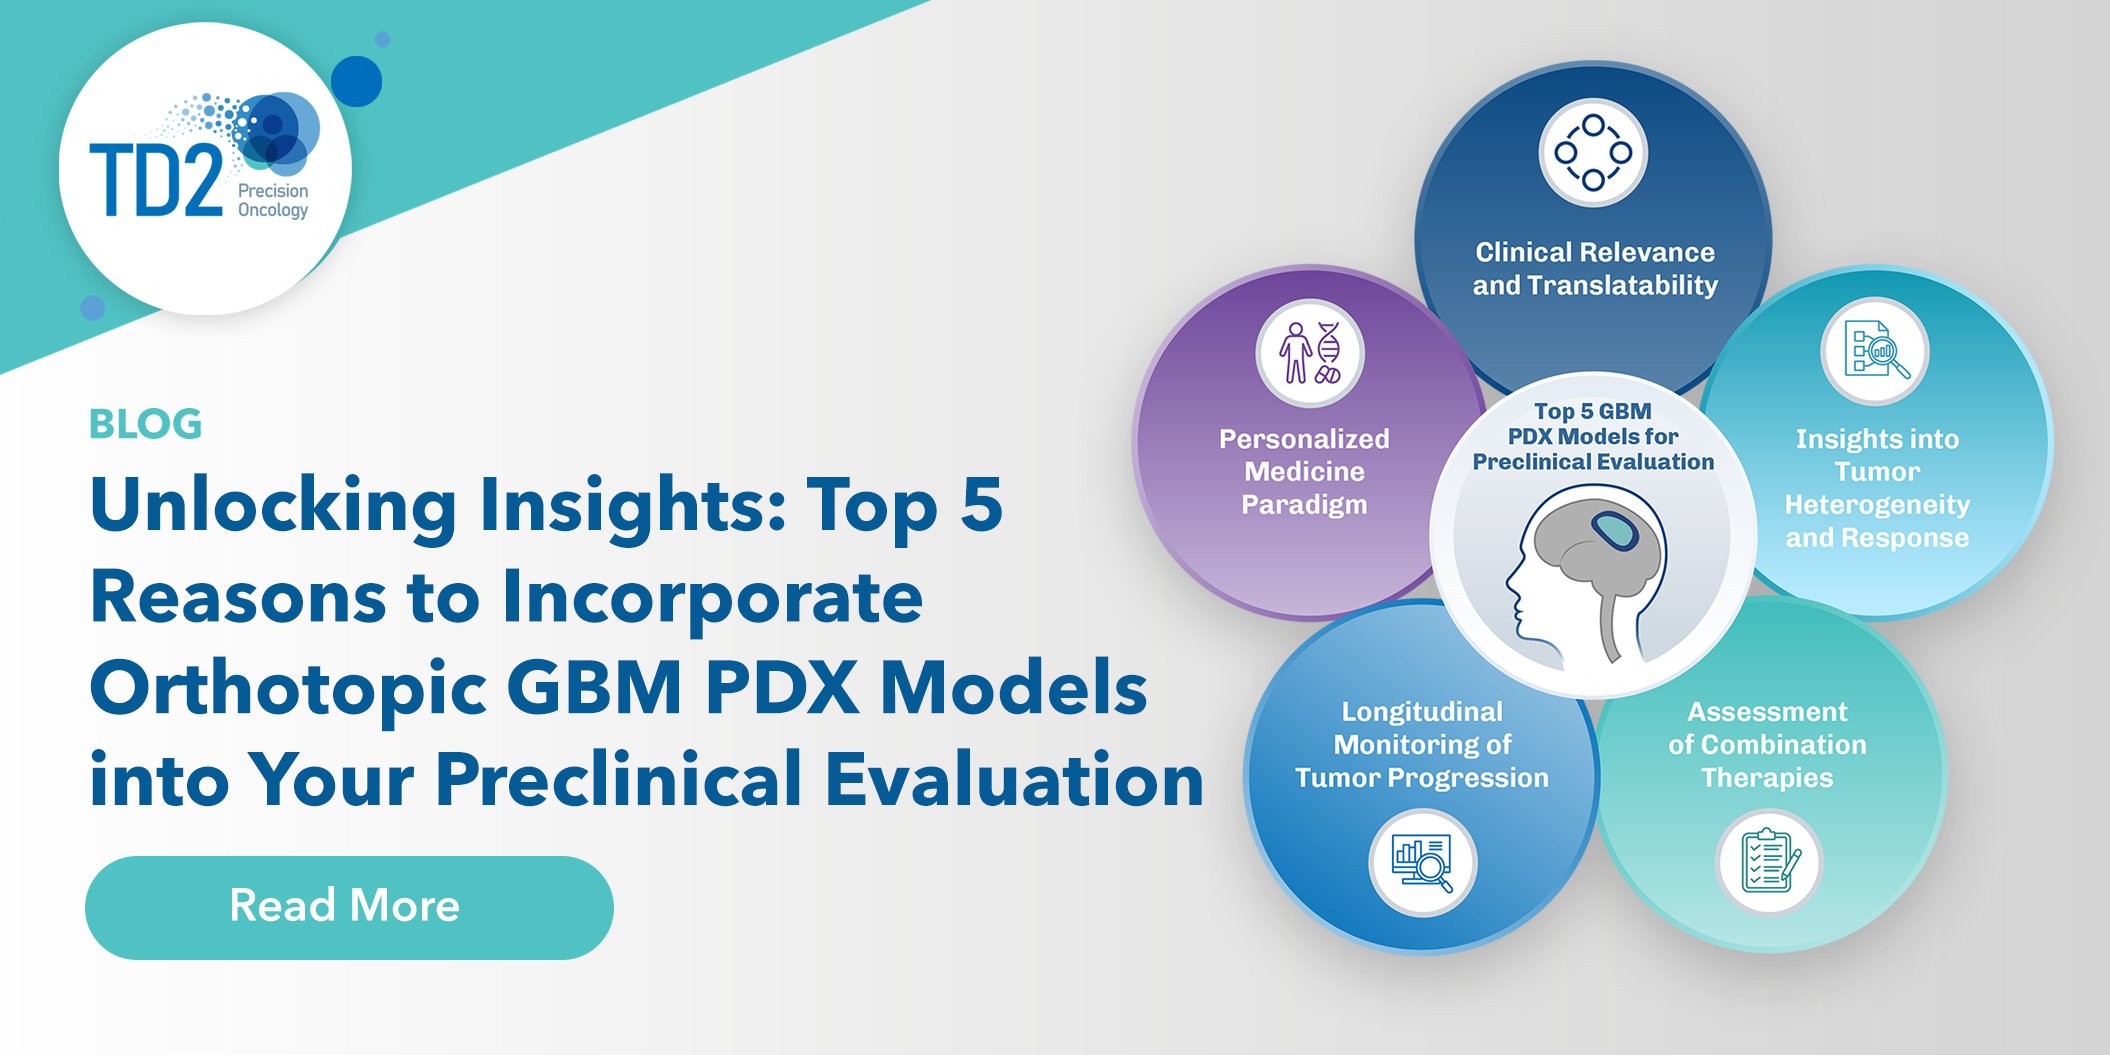 Unlocking Insights: Top 5 Reasons to Incorporate Orthotopic GBM PDX Models into Your Preclinical Evaluation